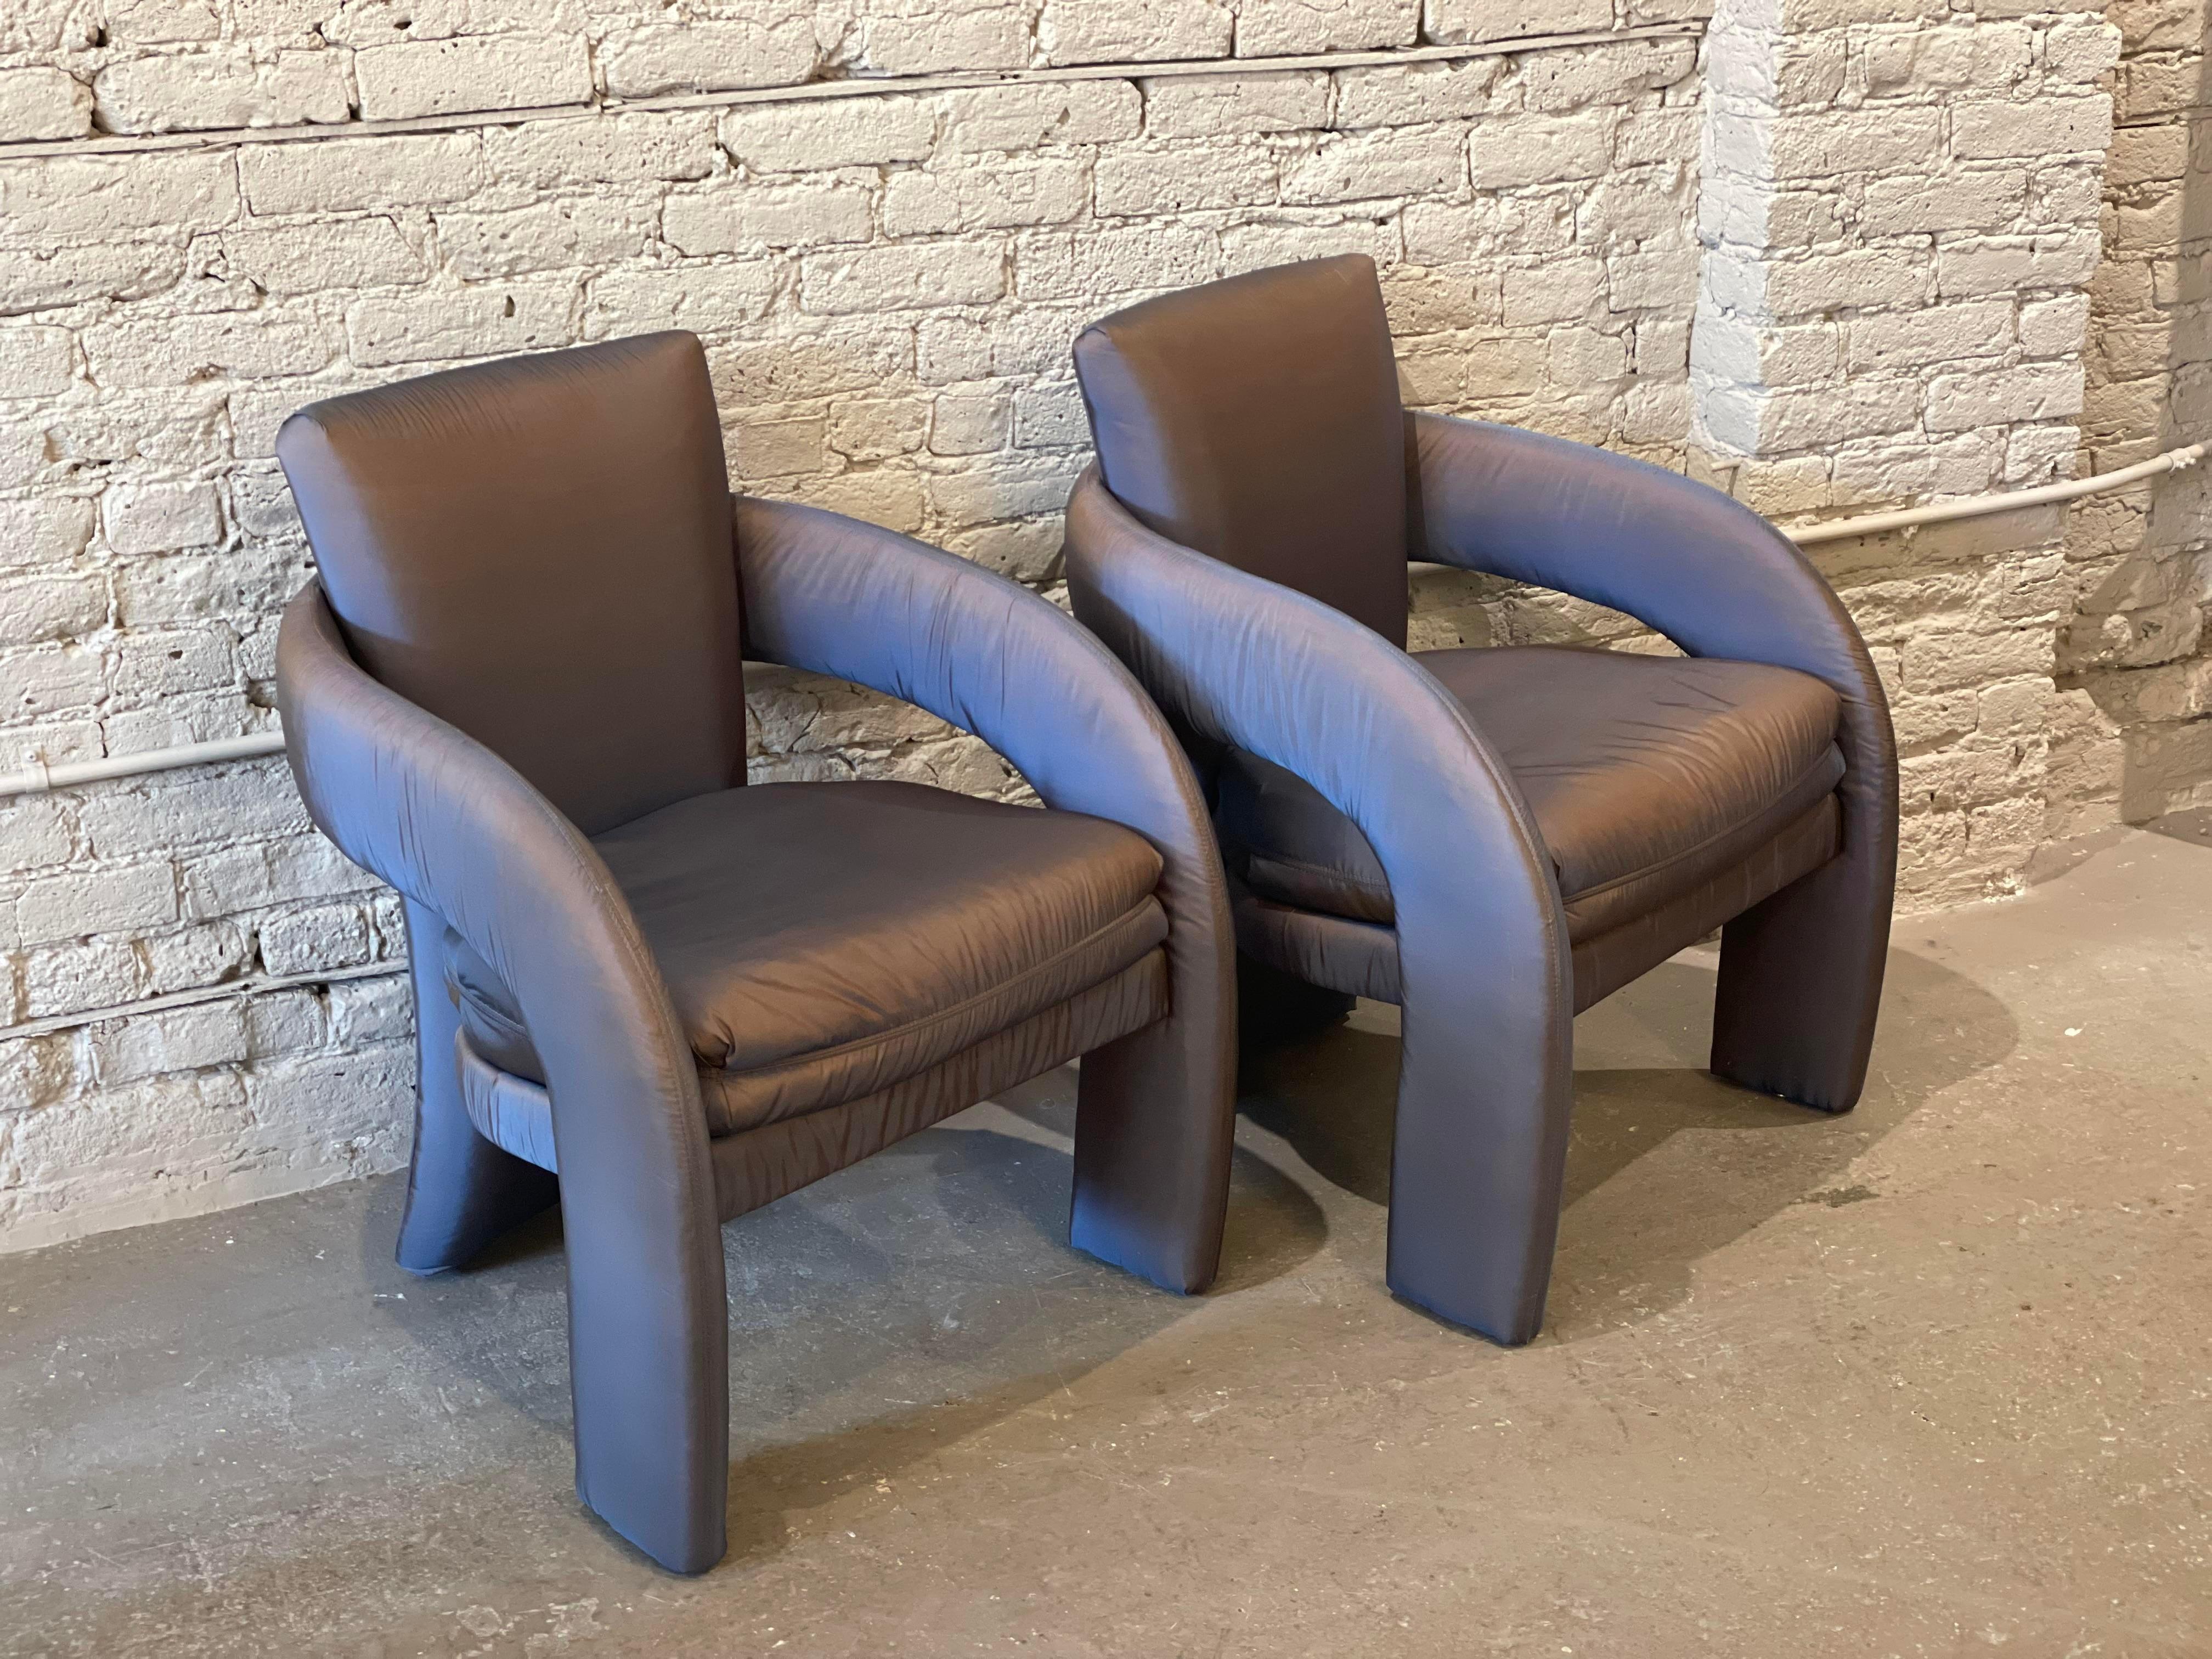 American 1980s Postmodern Chairs - a Pair For Sale